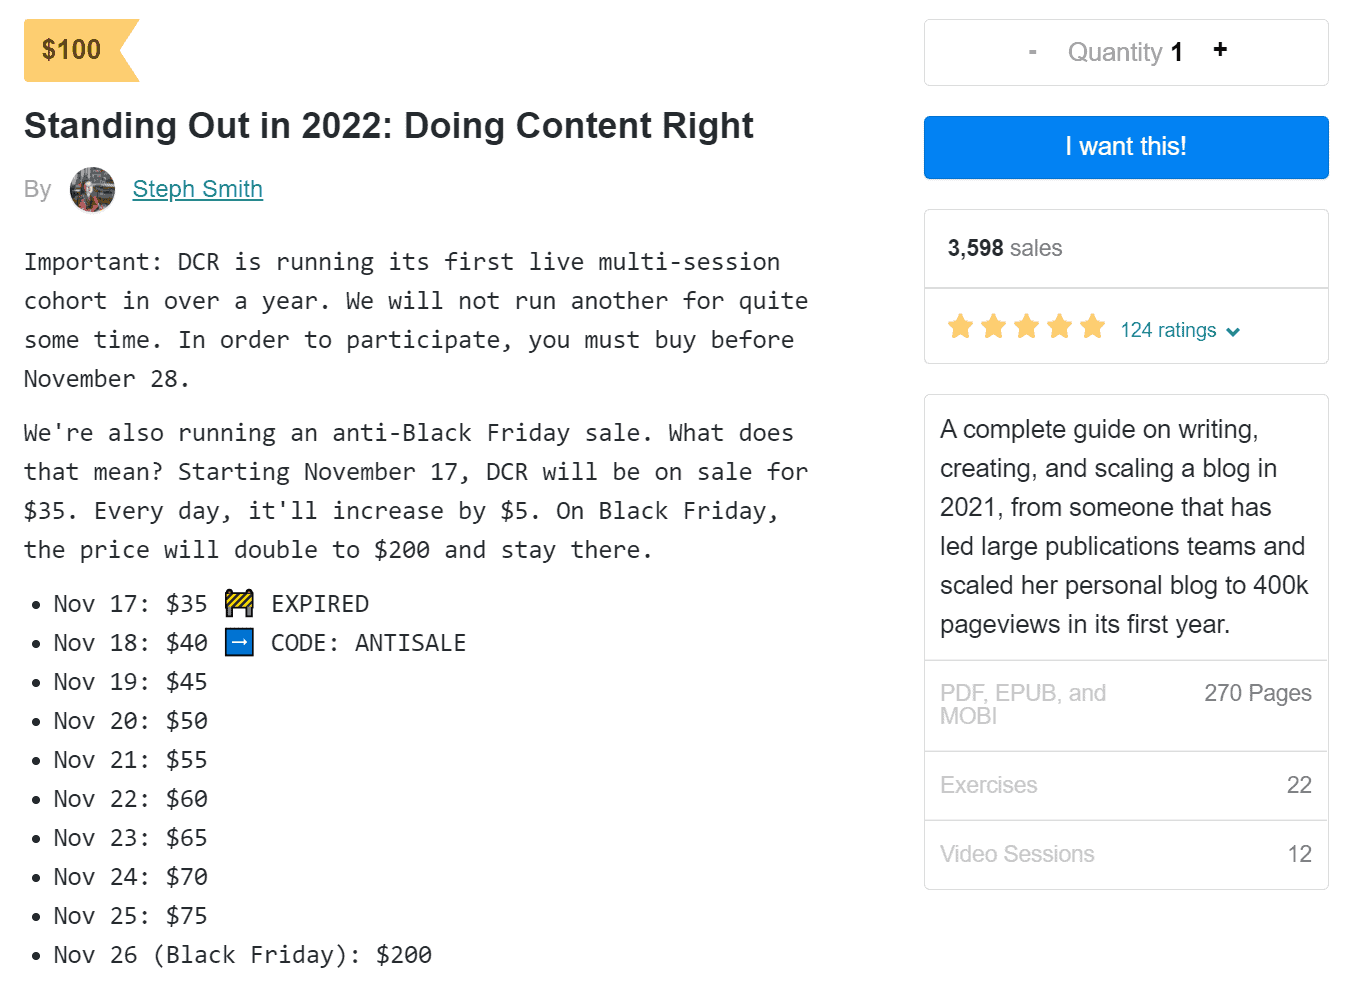 Doing right content - increase price $5 everyday